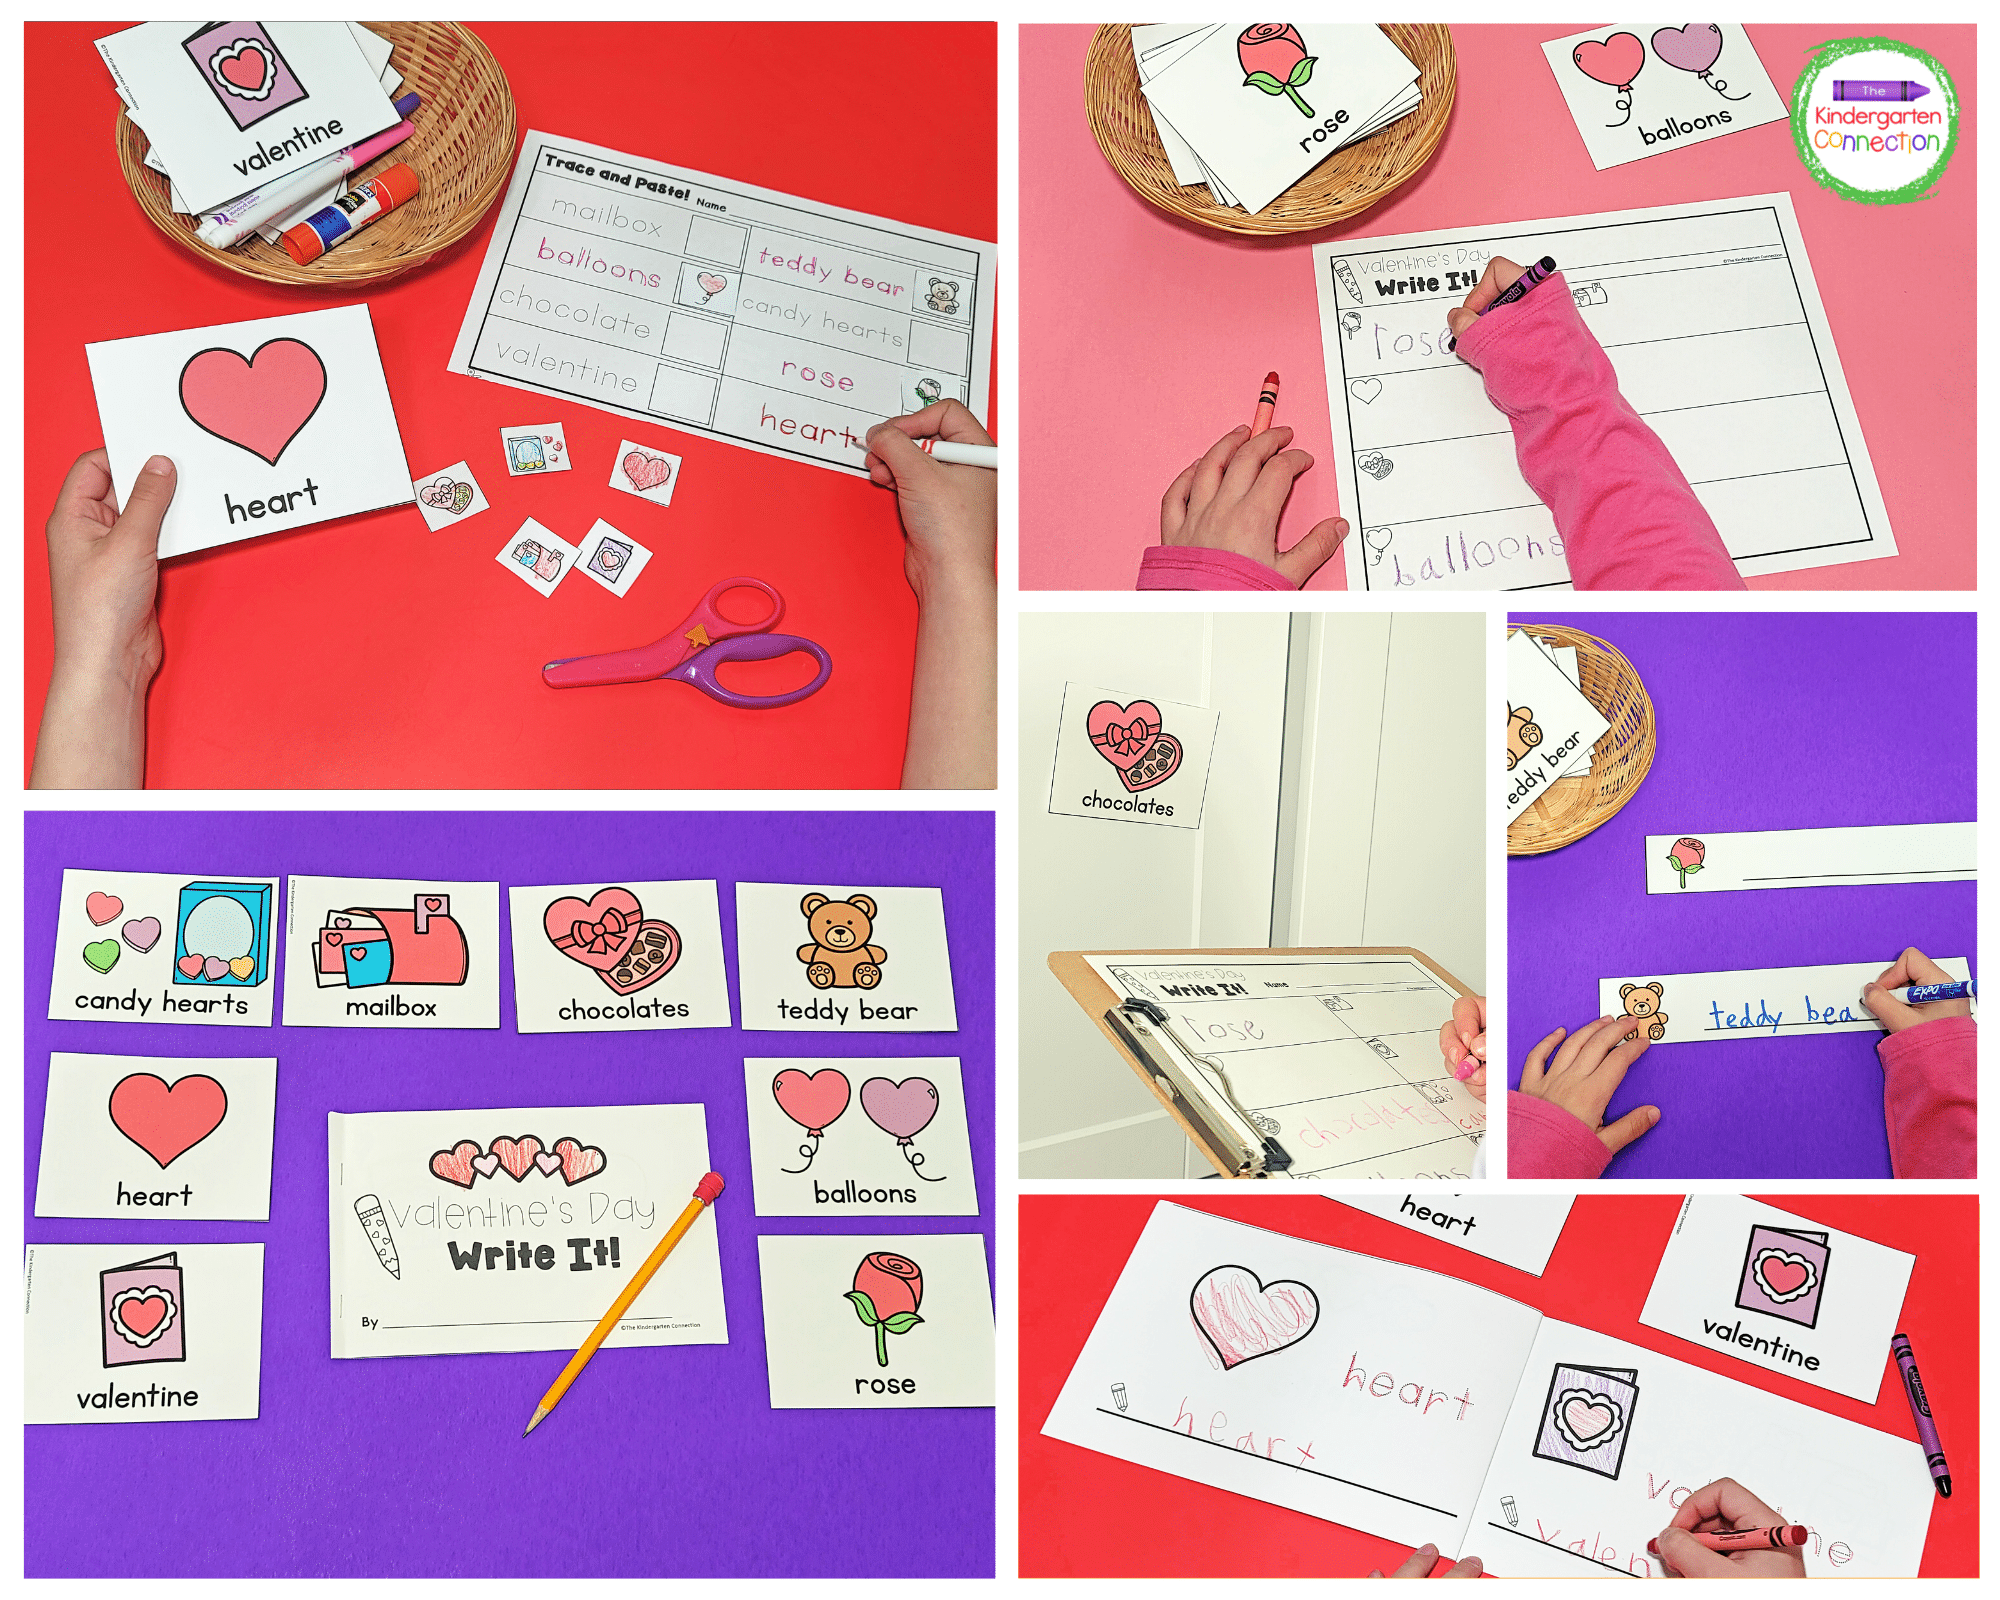 These Valentine's Day writing activities are hands-on, fun, and engaging!